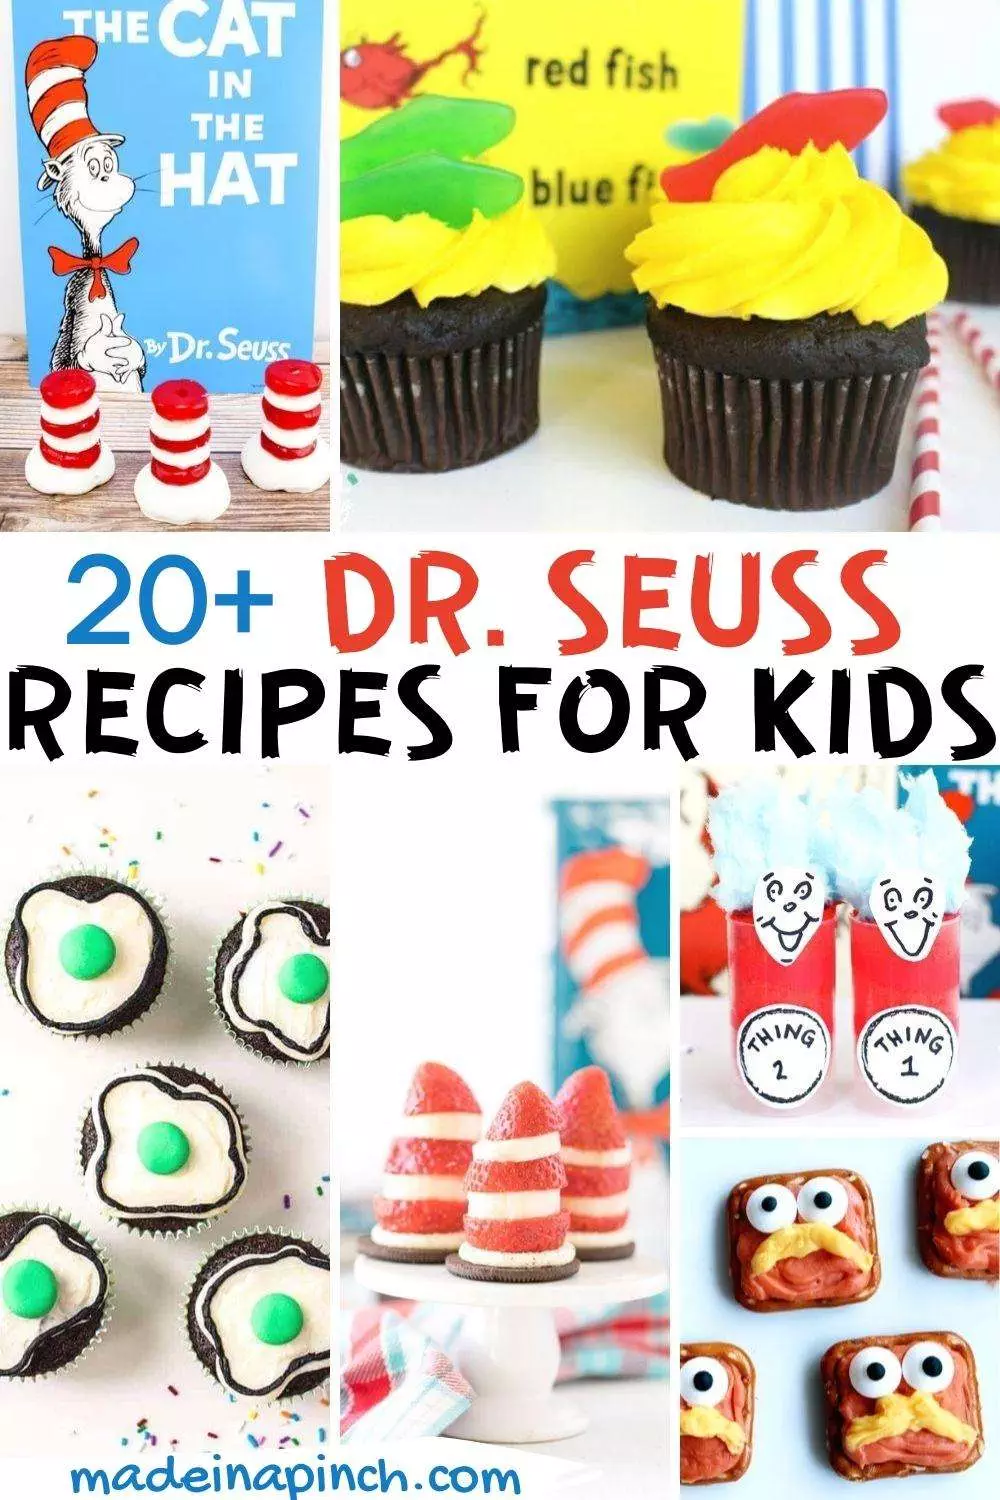 Dr. Seuss-inspired recipes pin